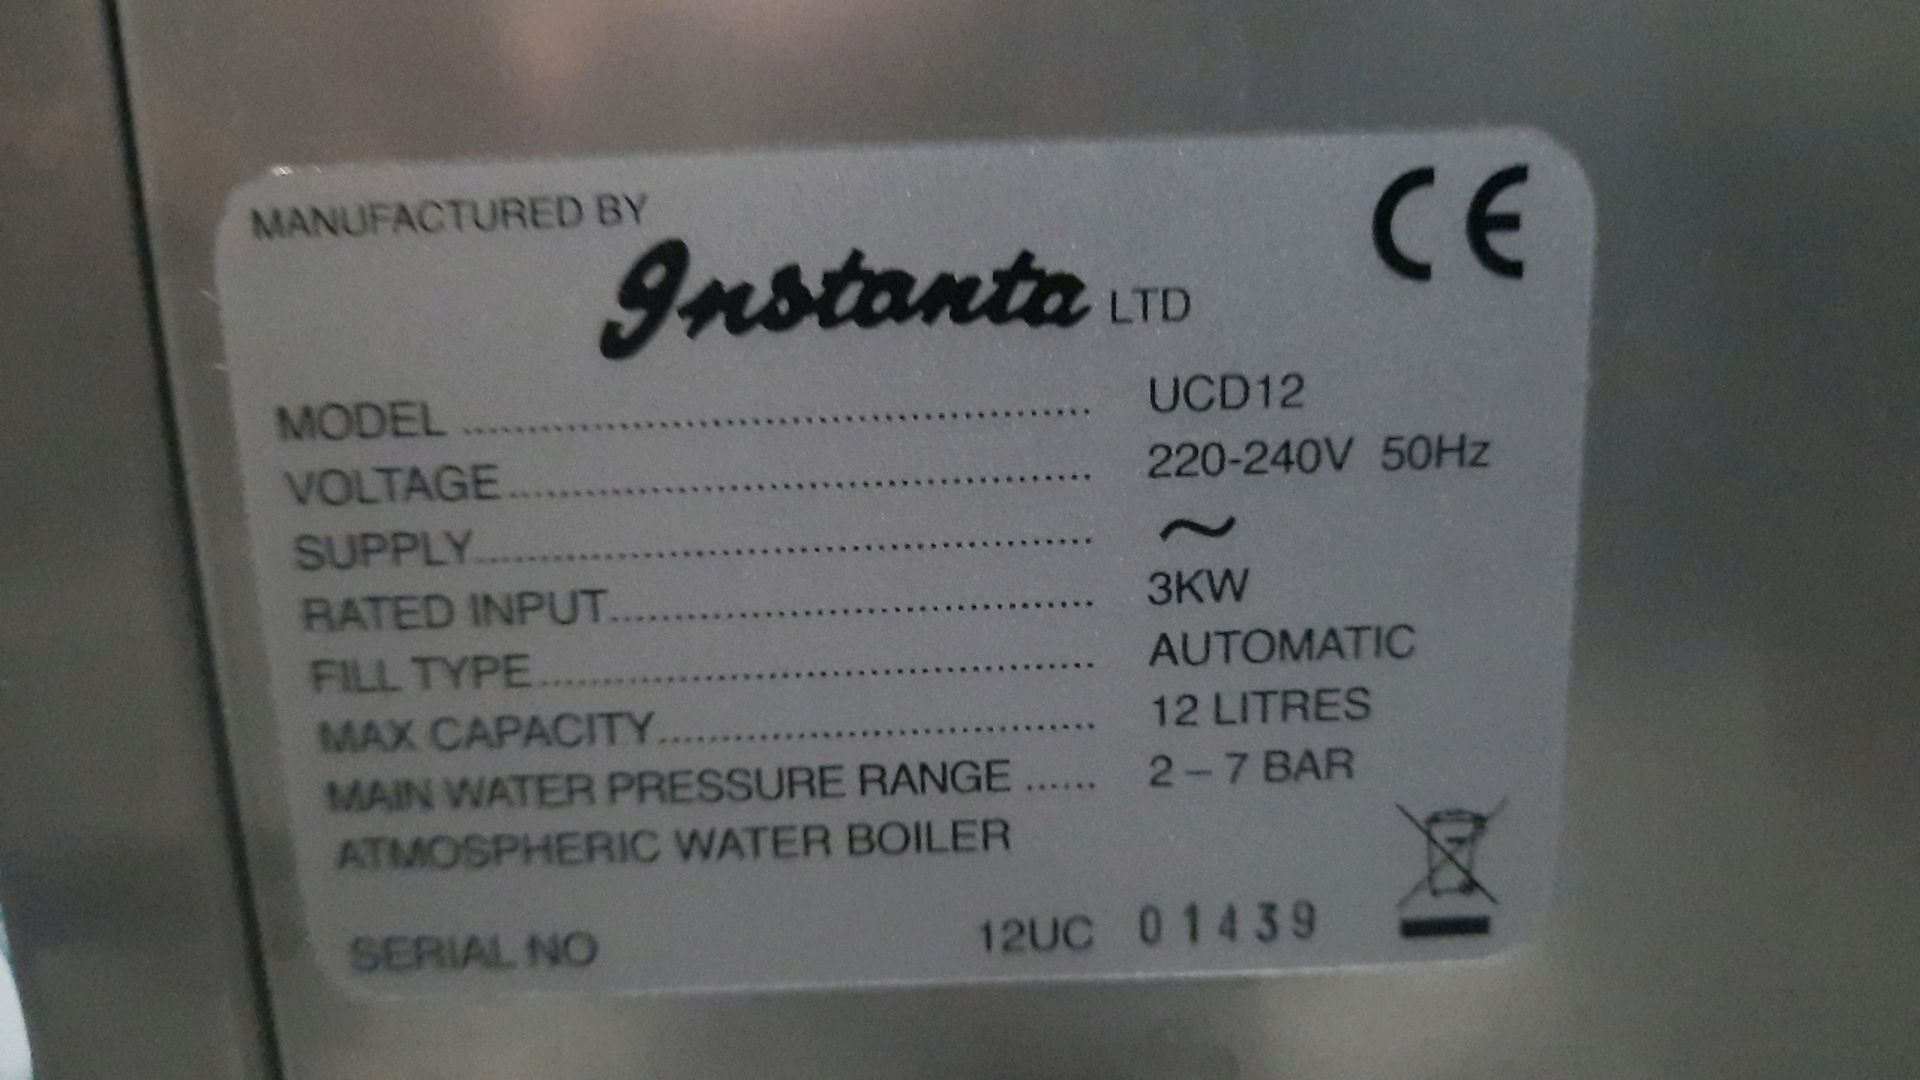 Instanta Stainless Steel Counter Hot Water Dispenser - Image 5 of 10